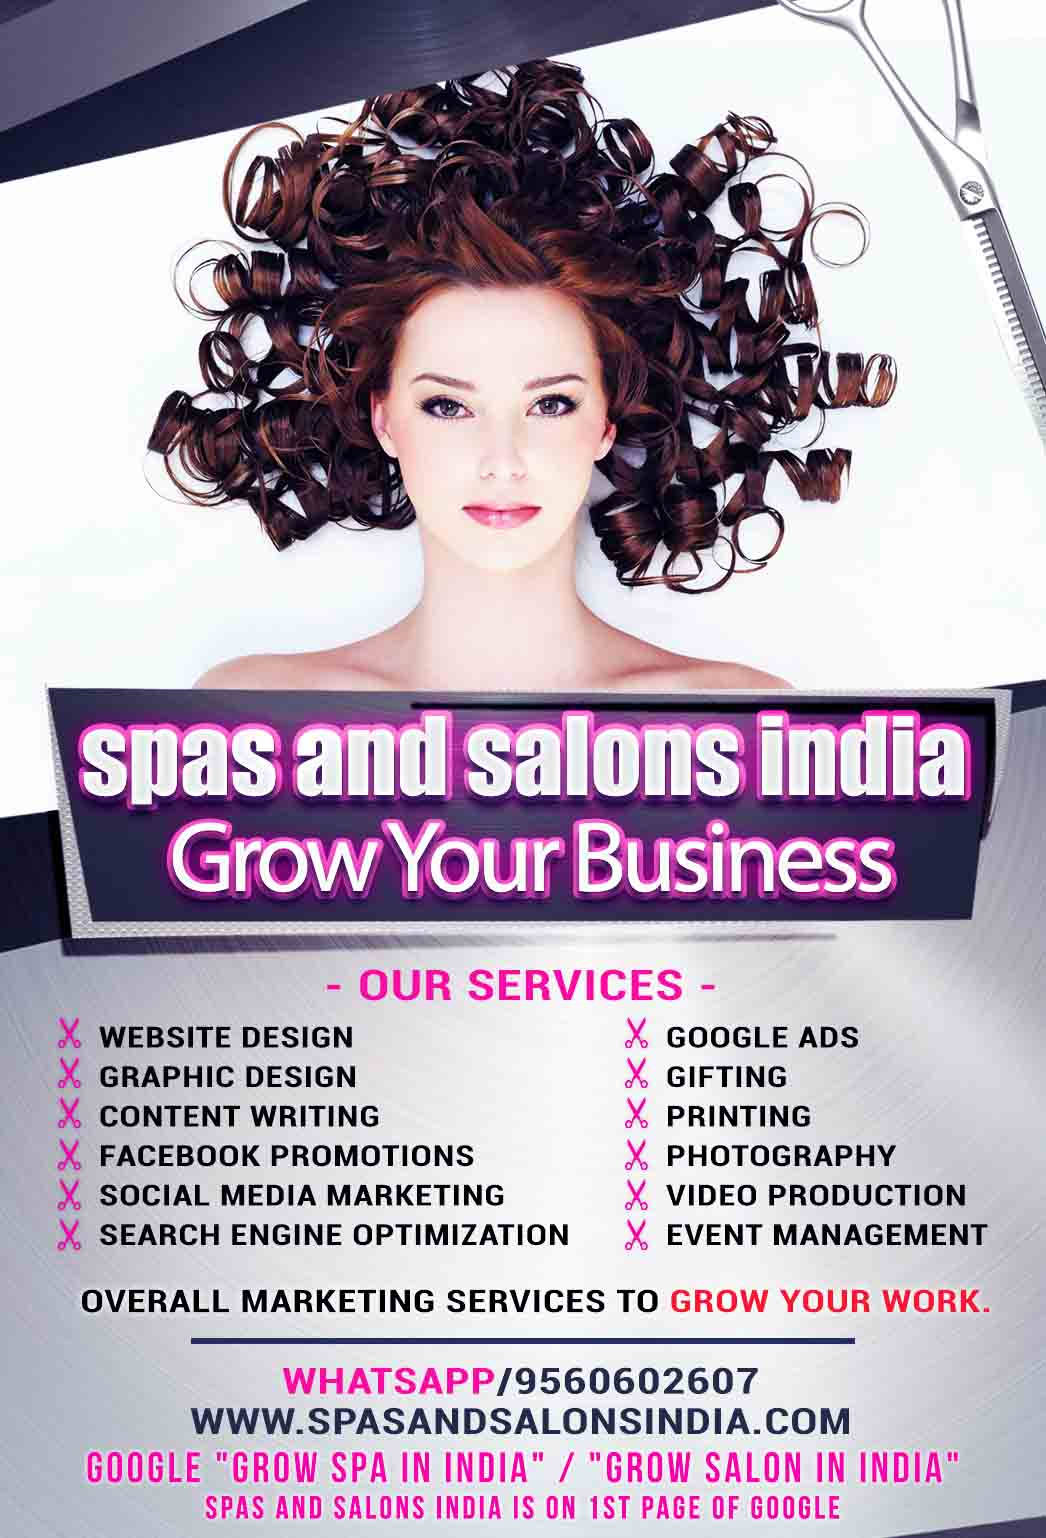 Grow Your Work with Spas and Salons India - For Spas, Salons, Make-Up Artists, Hair Stylists and Skin Care Specialists